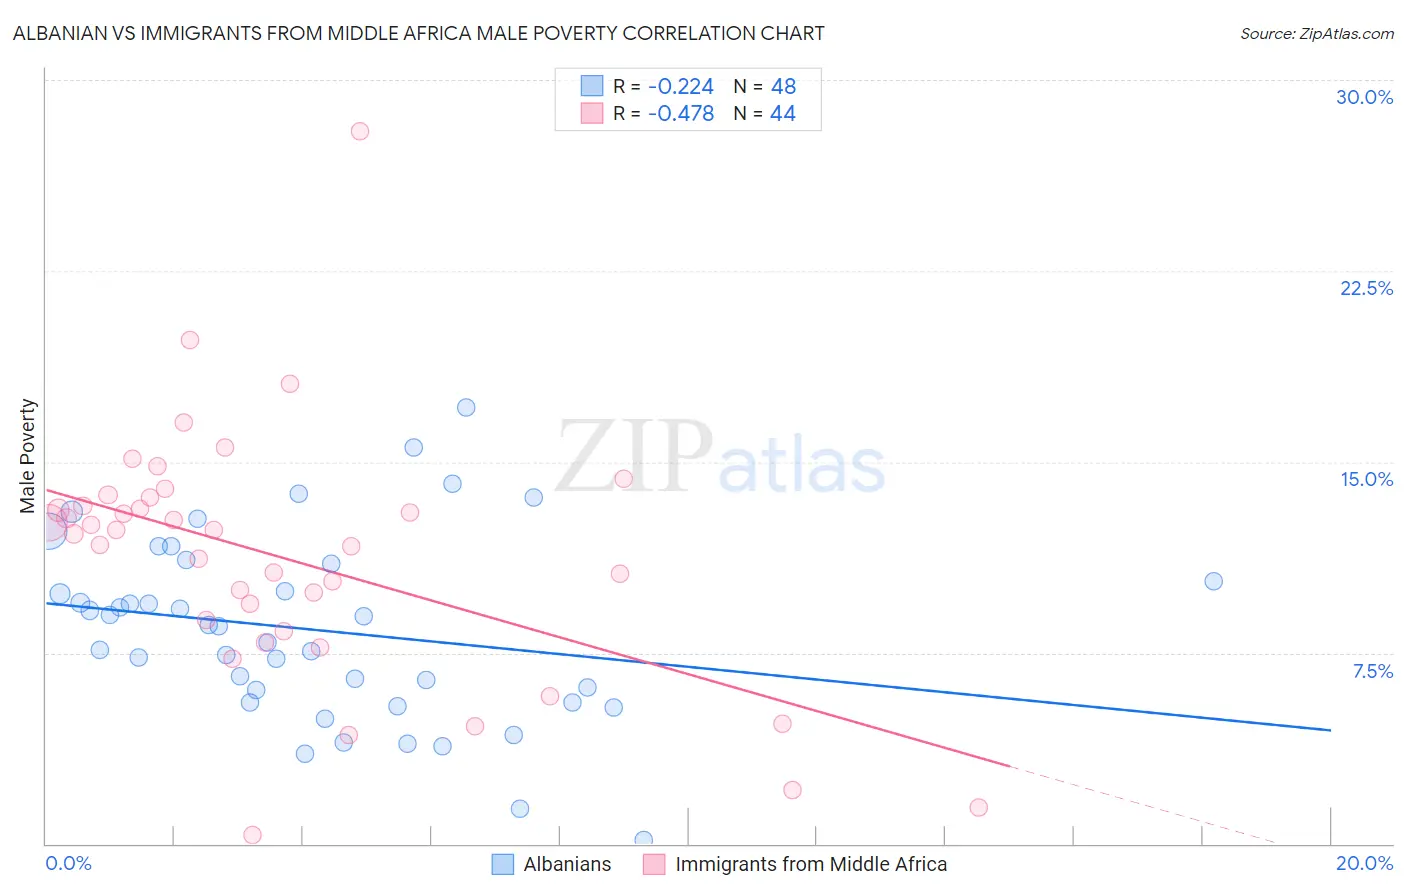 Albanian vs Immigrants from Middle Africa Male Poverty